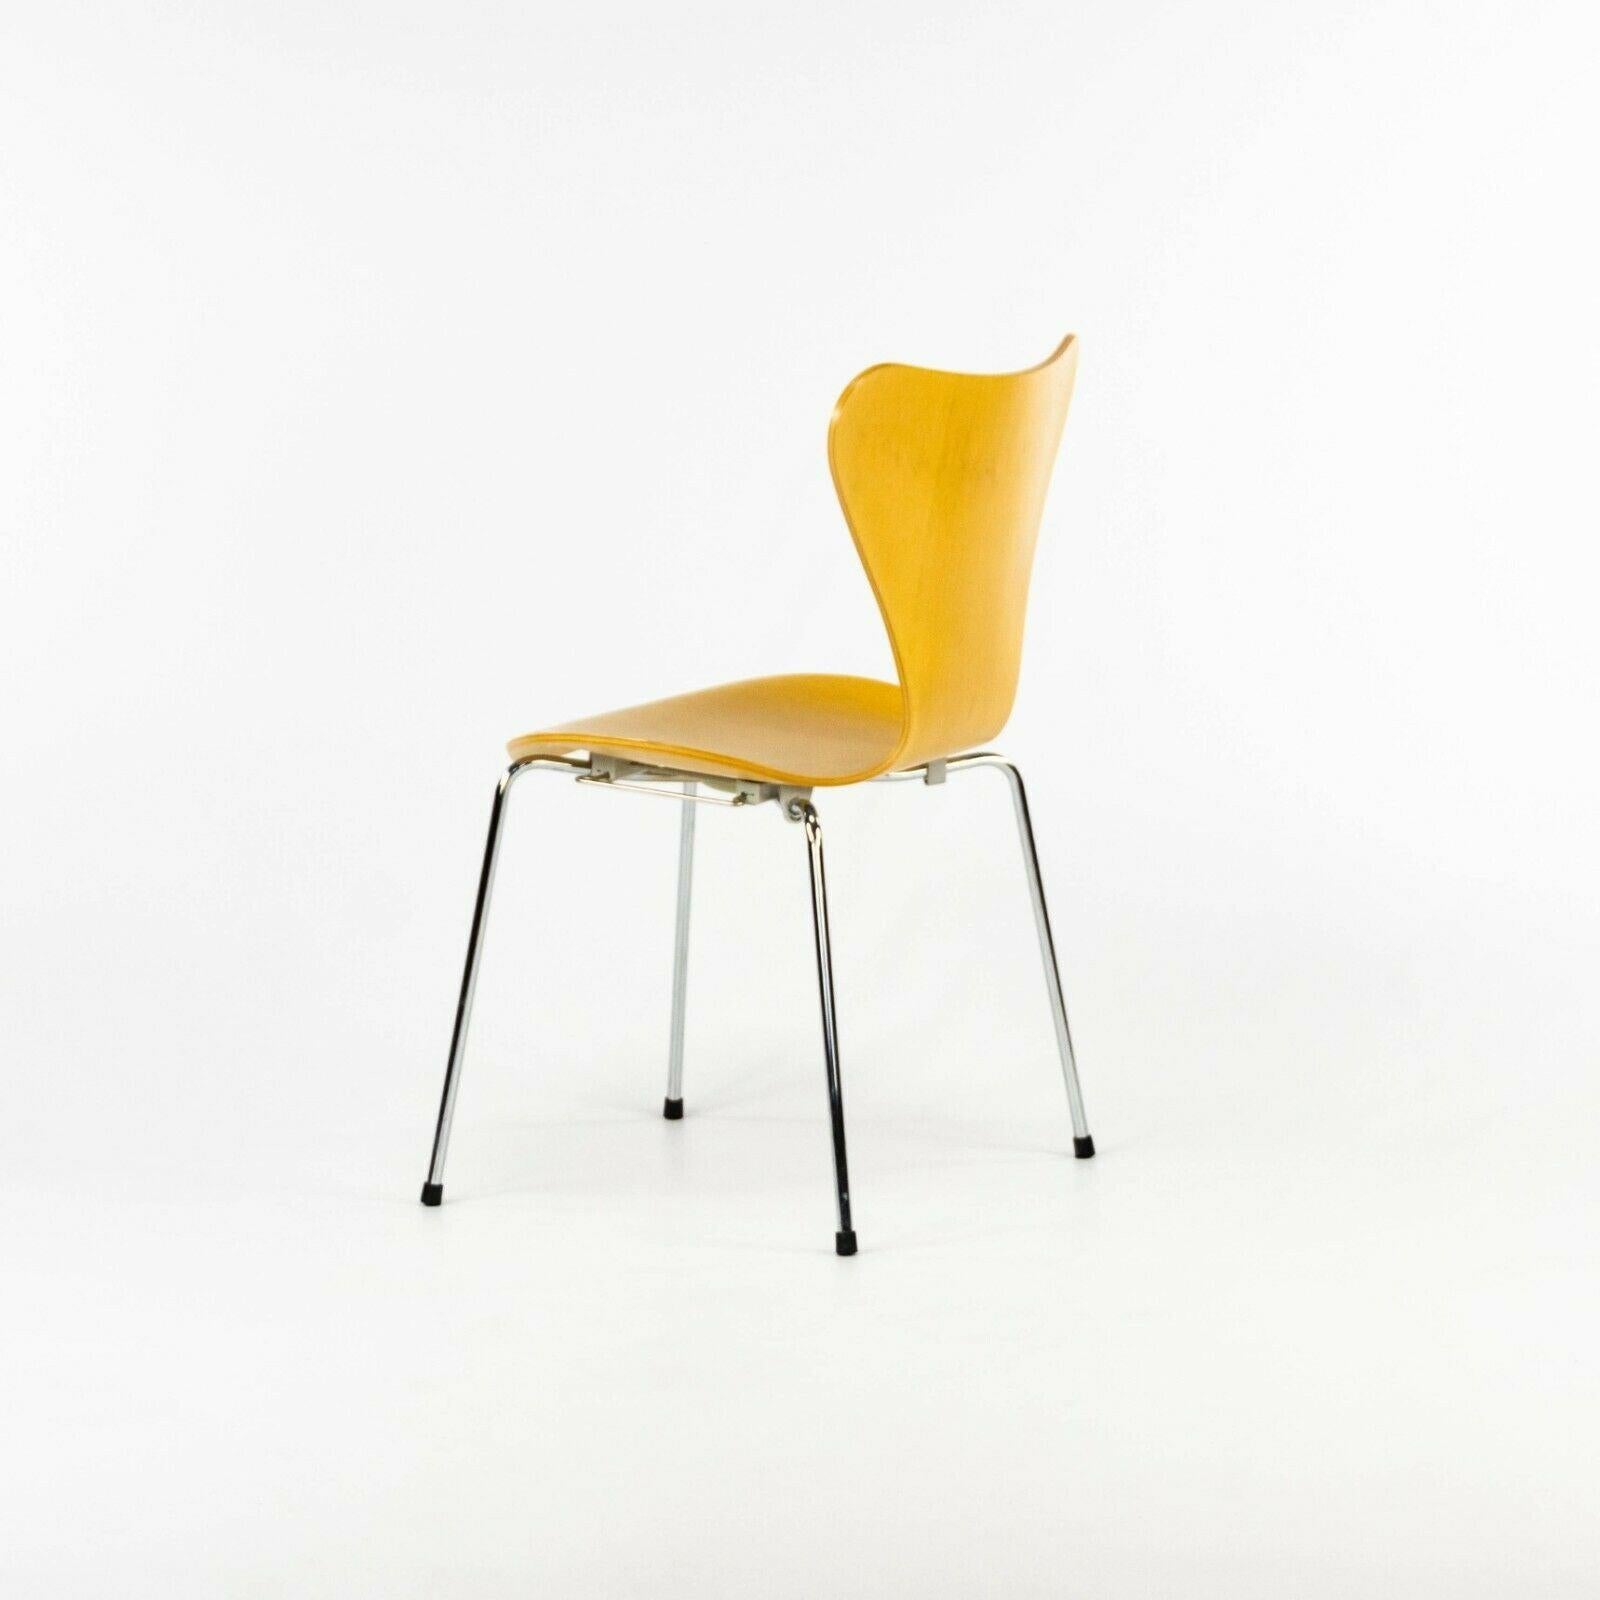 Contemporary 2001 Arne Jacobsen for Fritz Hansen Knoll Series 7 Stacking & Interlocking Chair For Sale